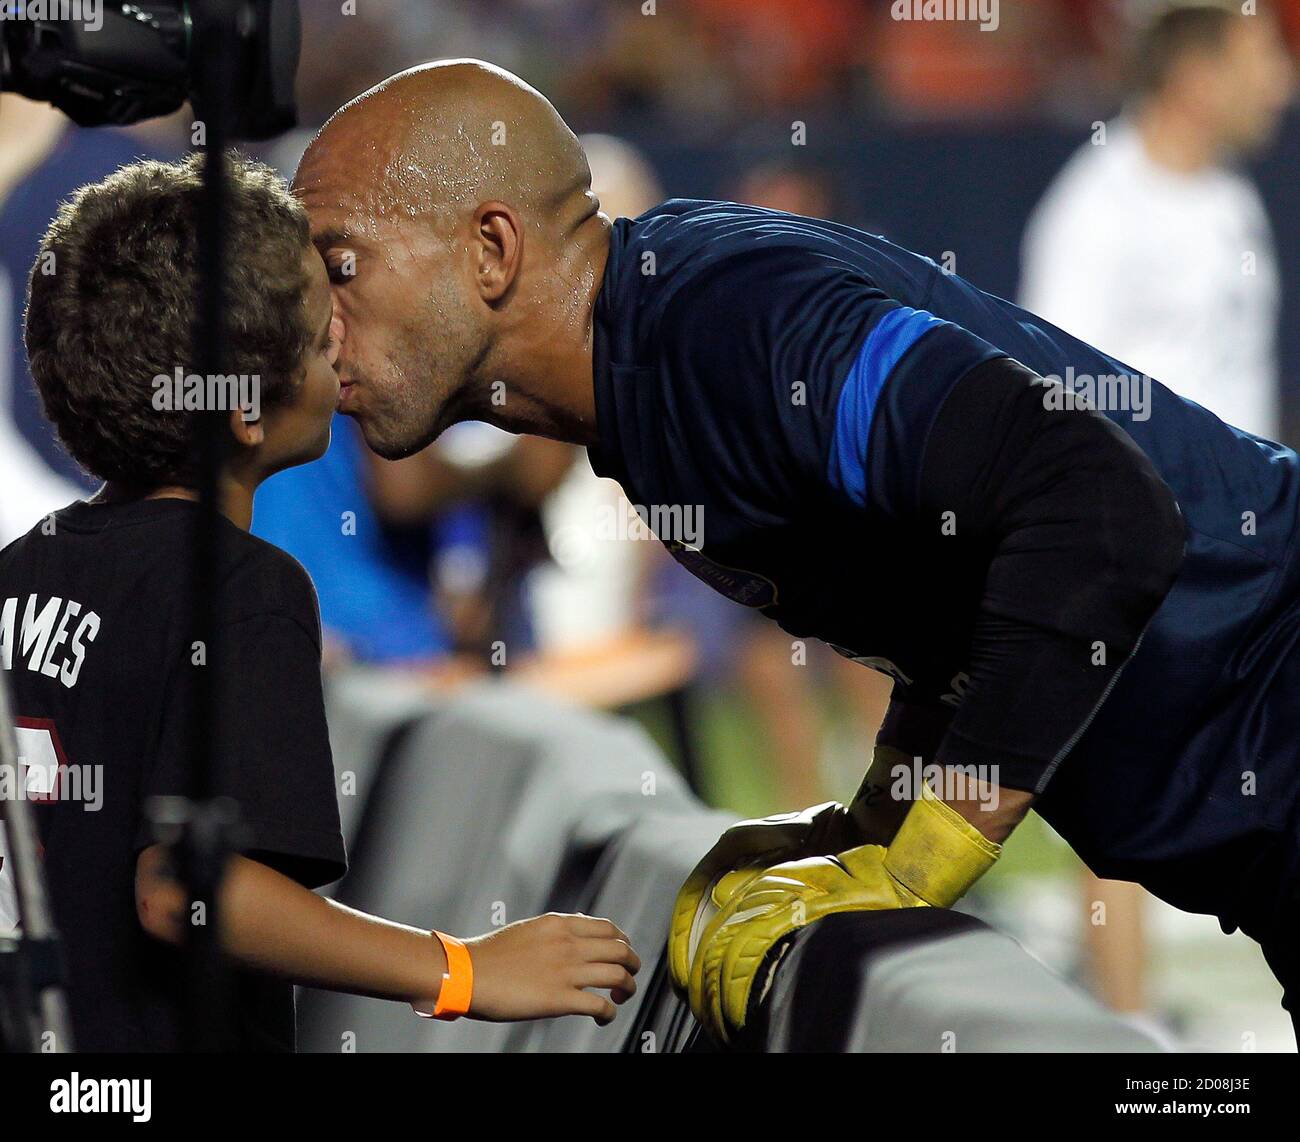 Howard (L) gets a from his Everton's goalkeeper Tim Howard before before their Guinness International Champions Cup soccer match against Valencia in Miami Gardens, Florida August 6, 2013. REUTERS/Andrew